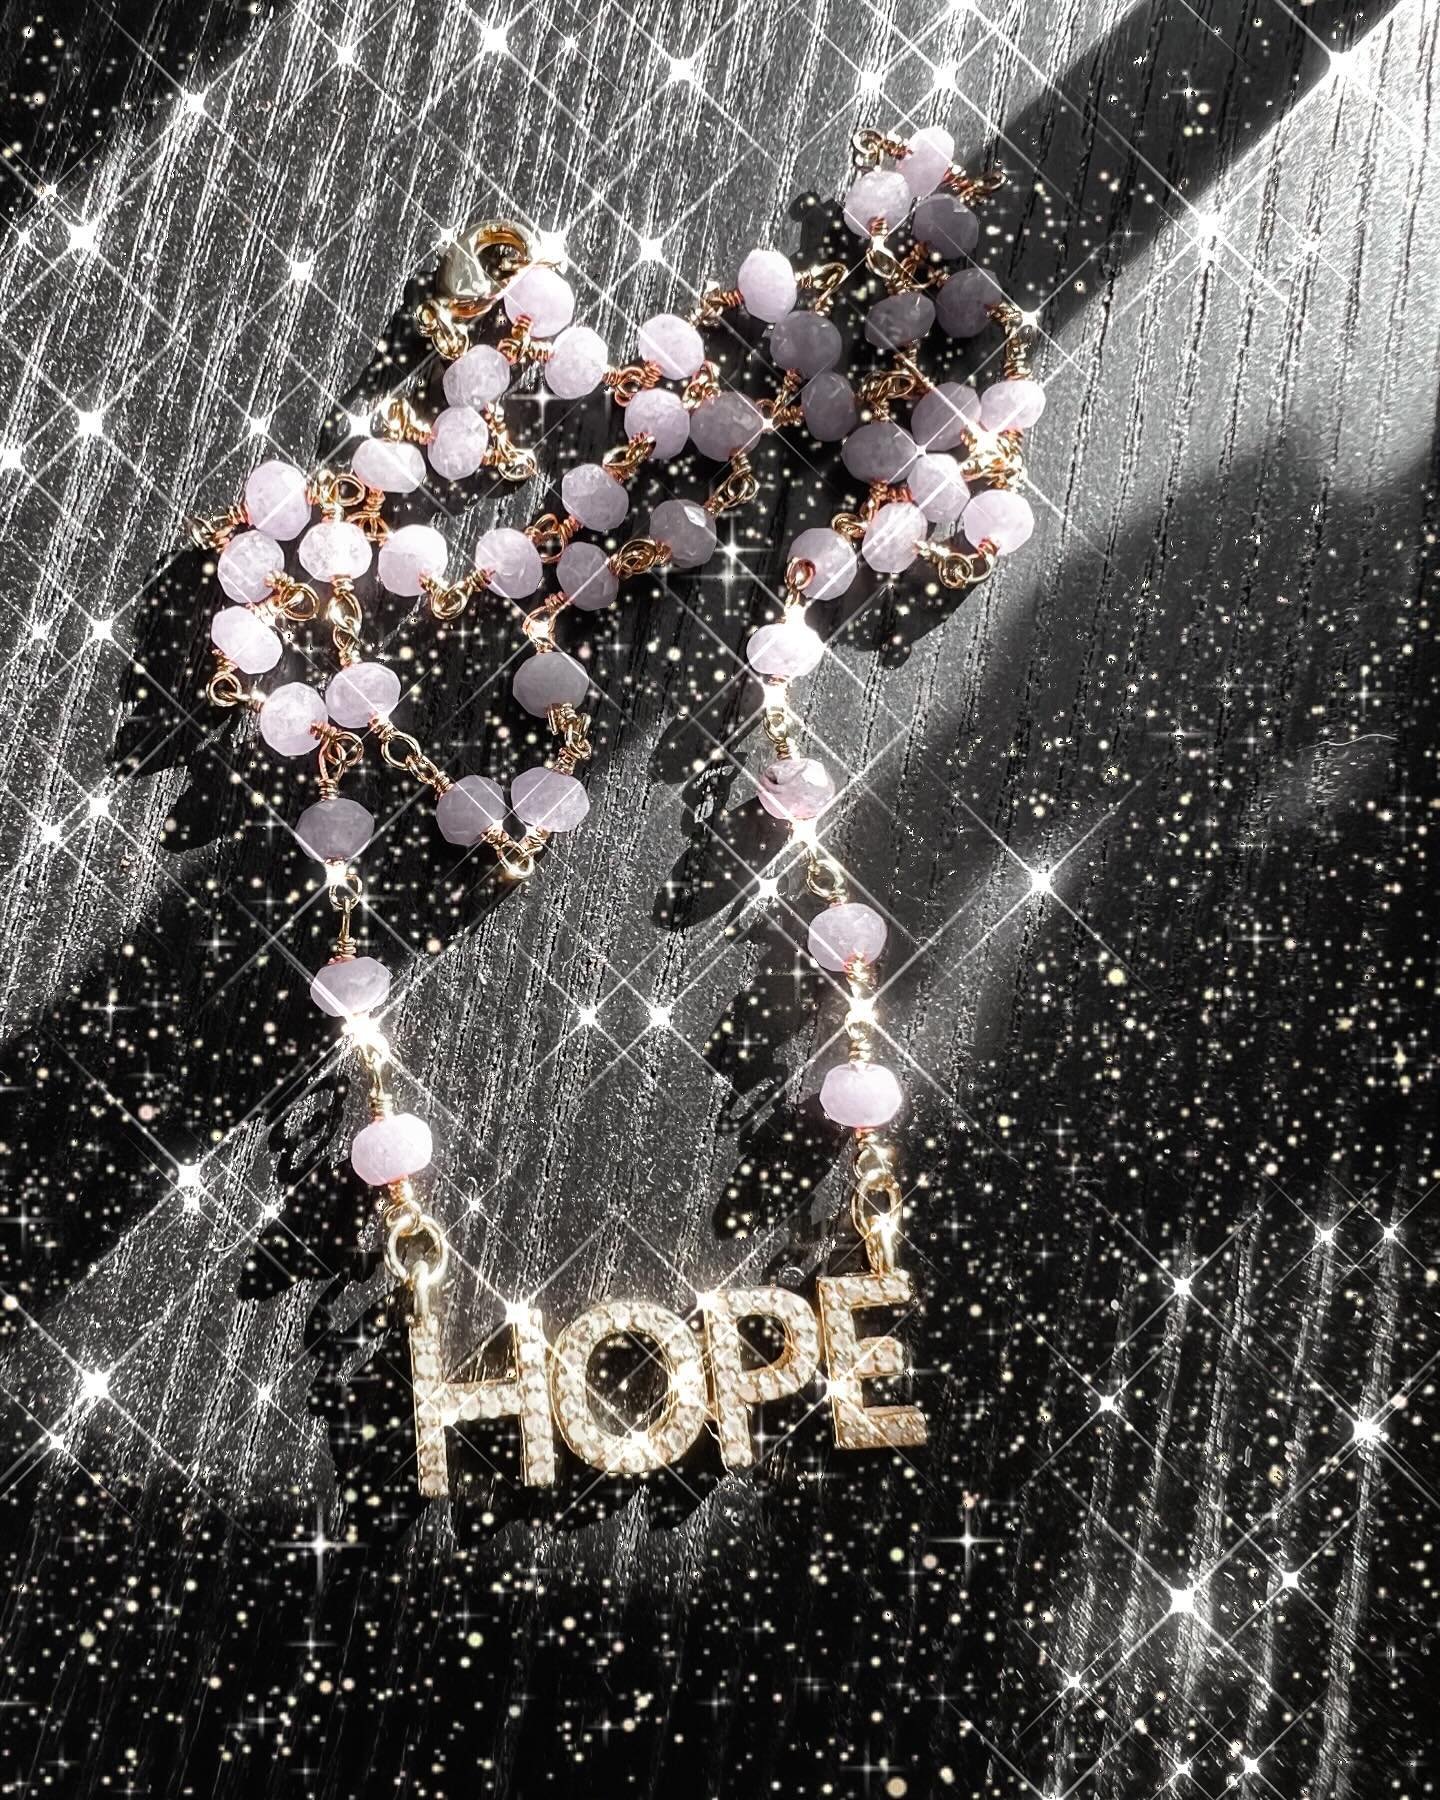 I am hope. 

I have hope. 

Pav&eacute; diamonds with lavender jade. 

Coming soon &hellip;

Jewelry | Jewelry Addict | Neckpiece | Necklace | Charms | Charm Necklace | Trendy Jewelry | Statement Jewelry | Gemstones | Crystals

#jewelry #jewelrybox #